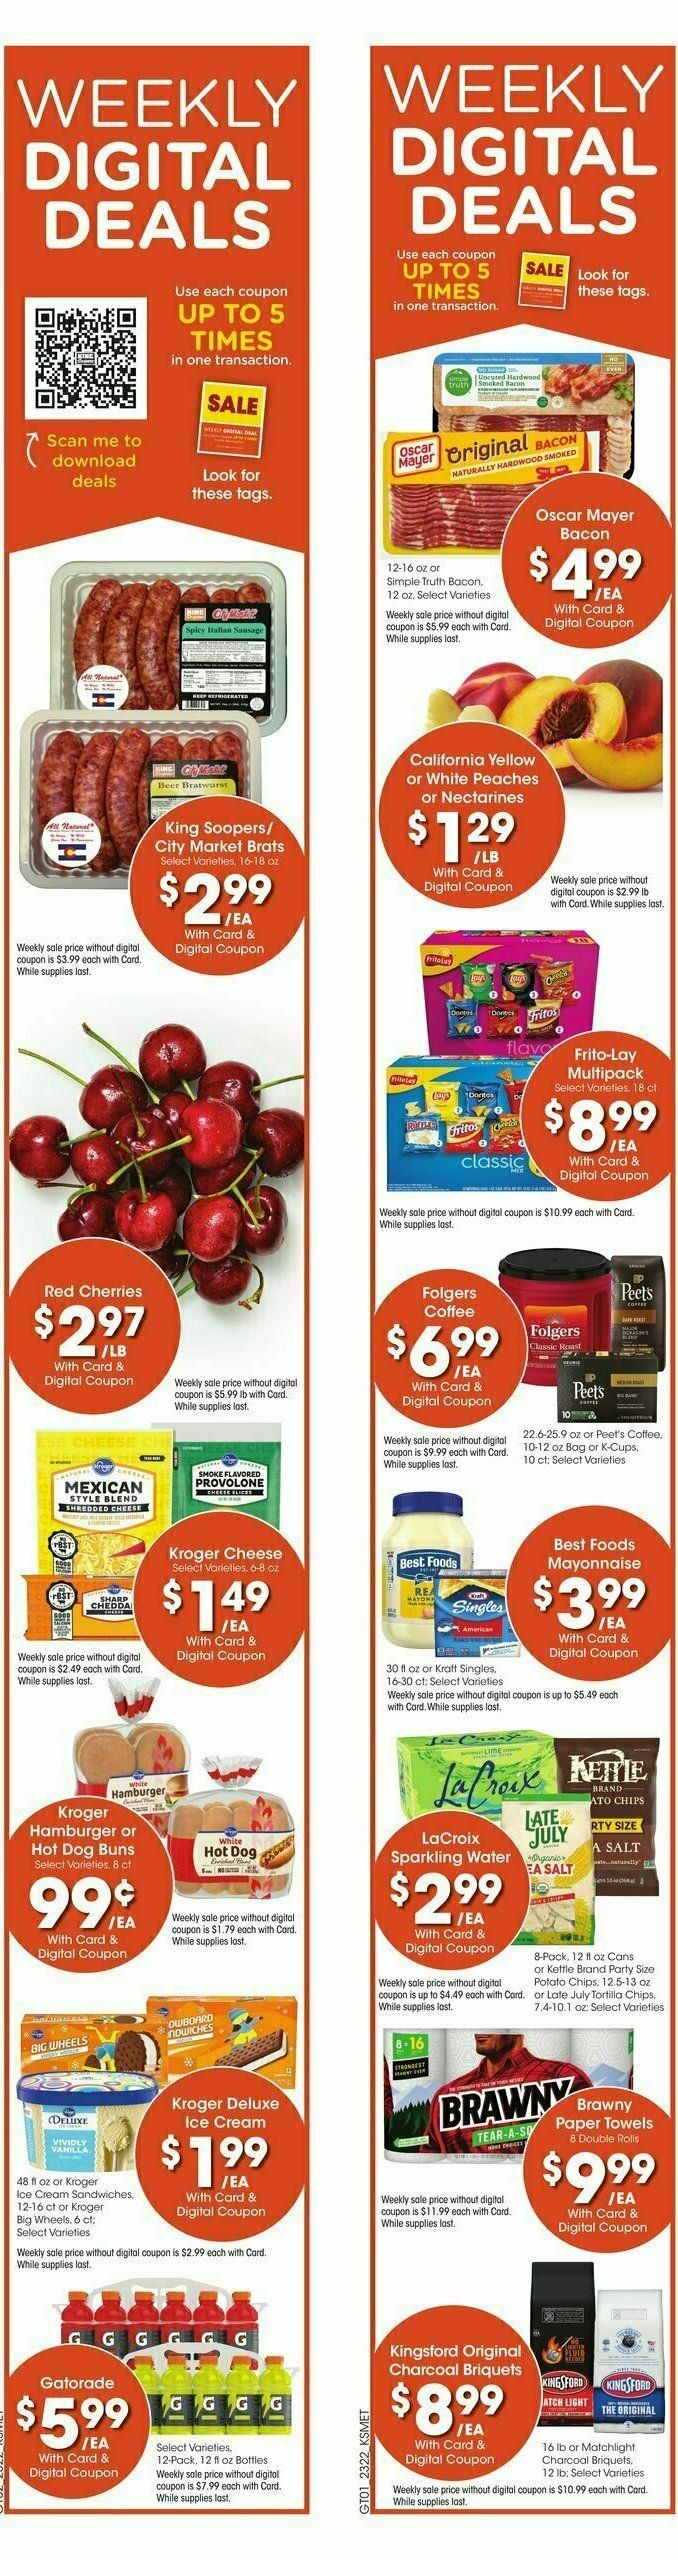 King Soopers Weekly Ad from June 28